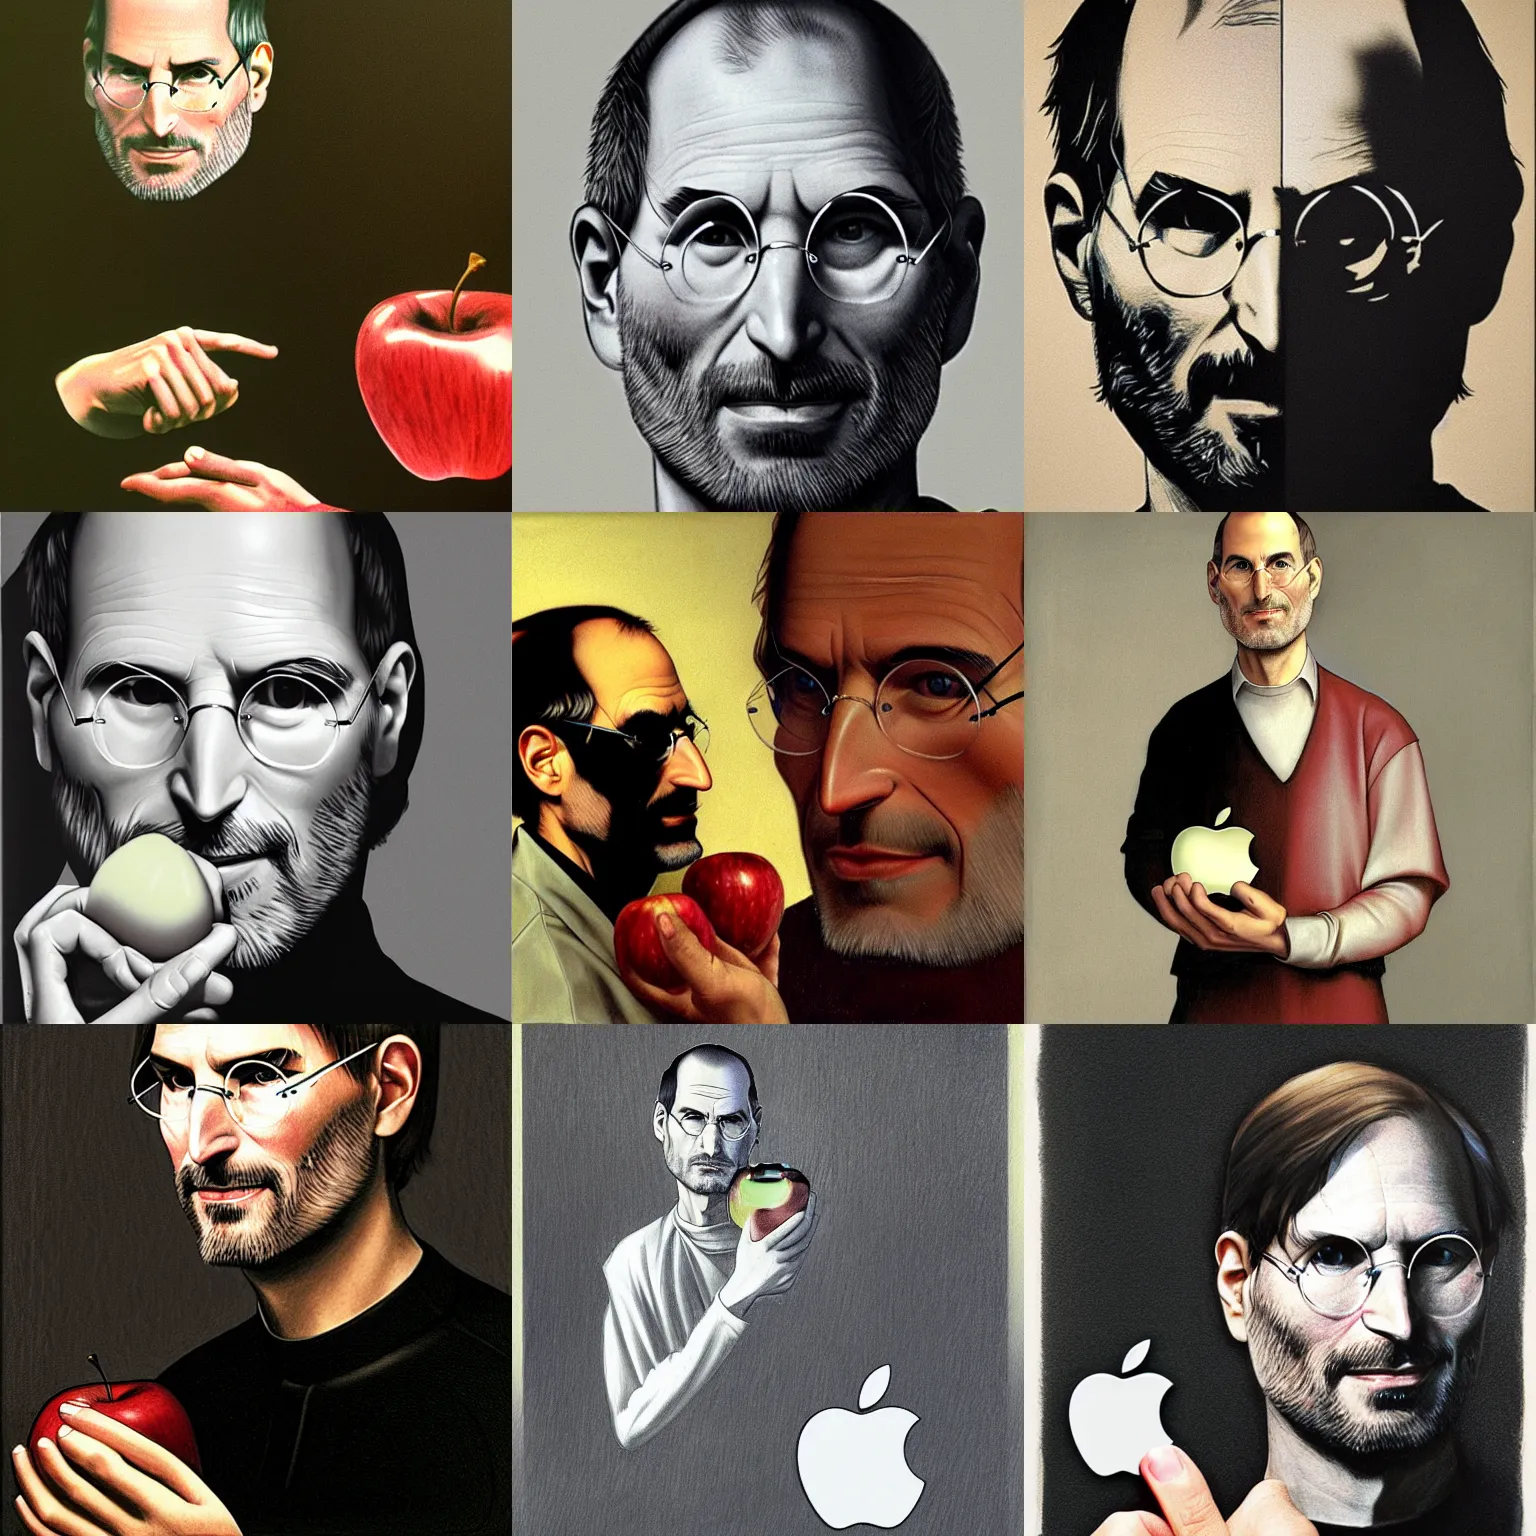 Prompt: steve jobs, holding an apple, avgn drawn by caravaggio